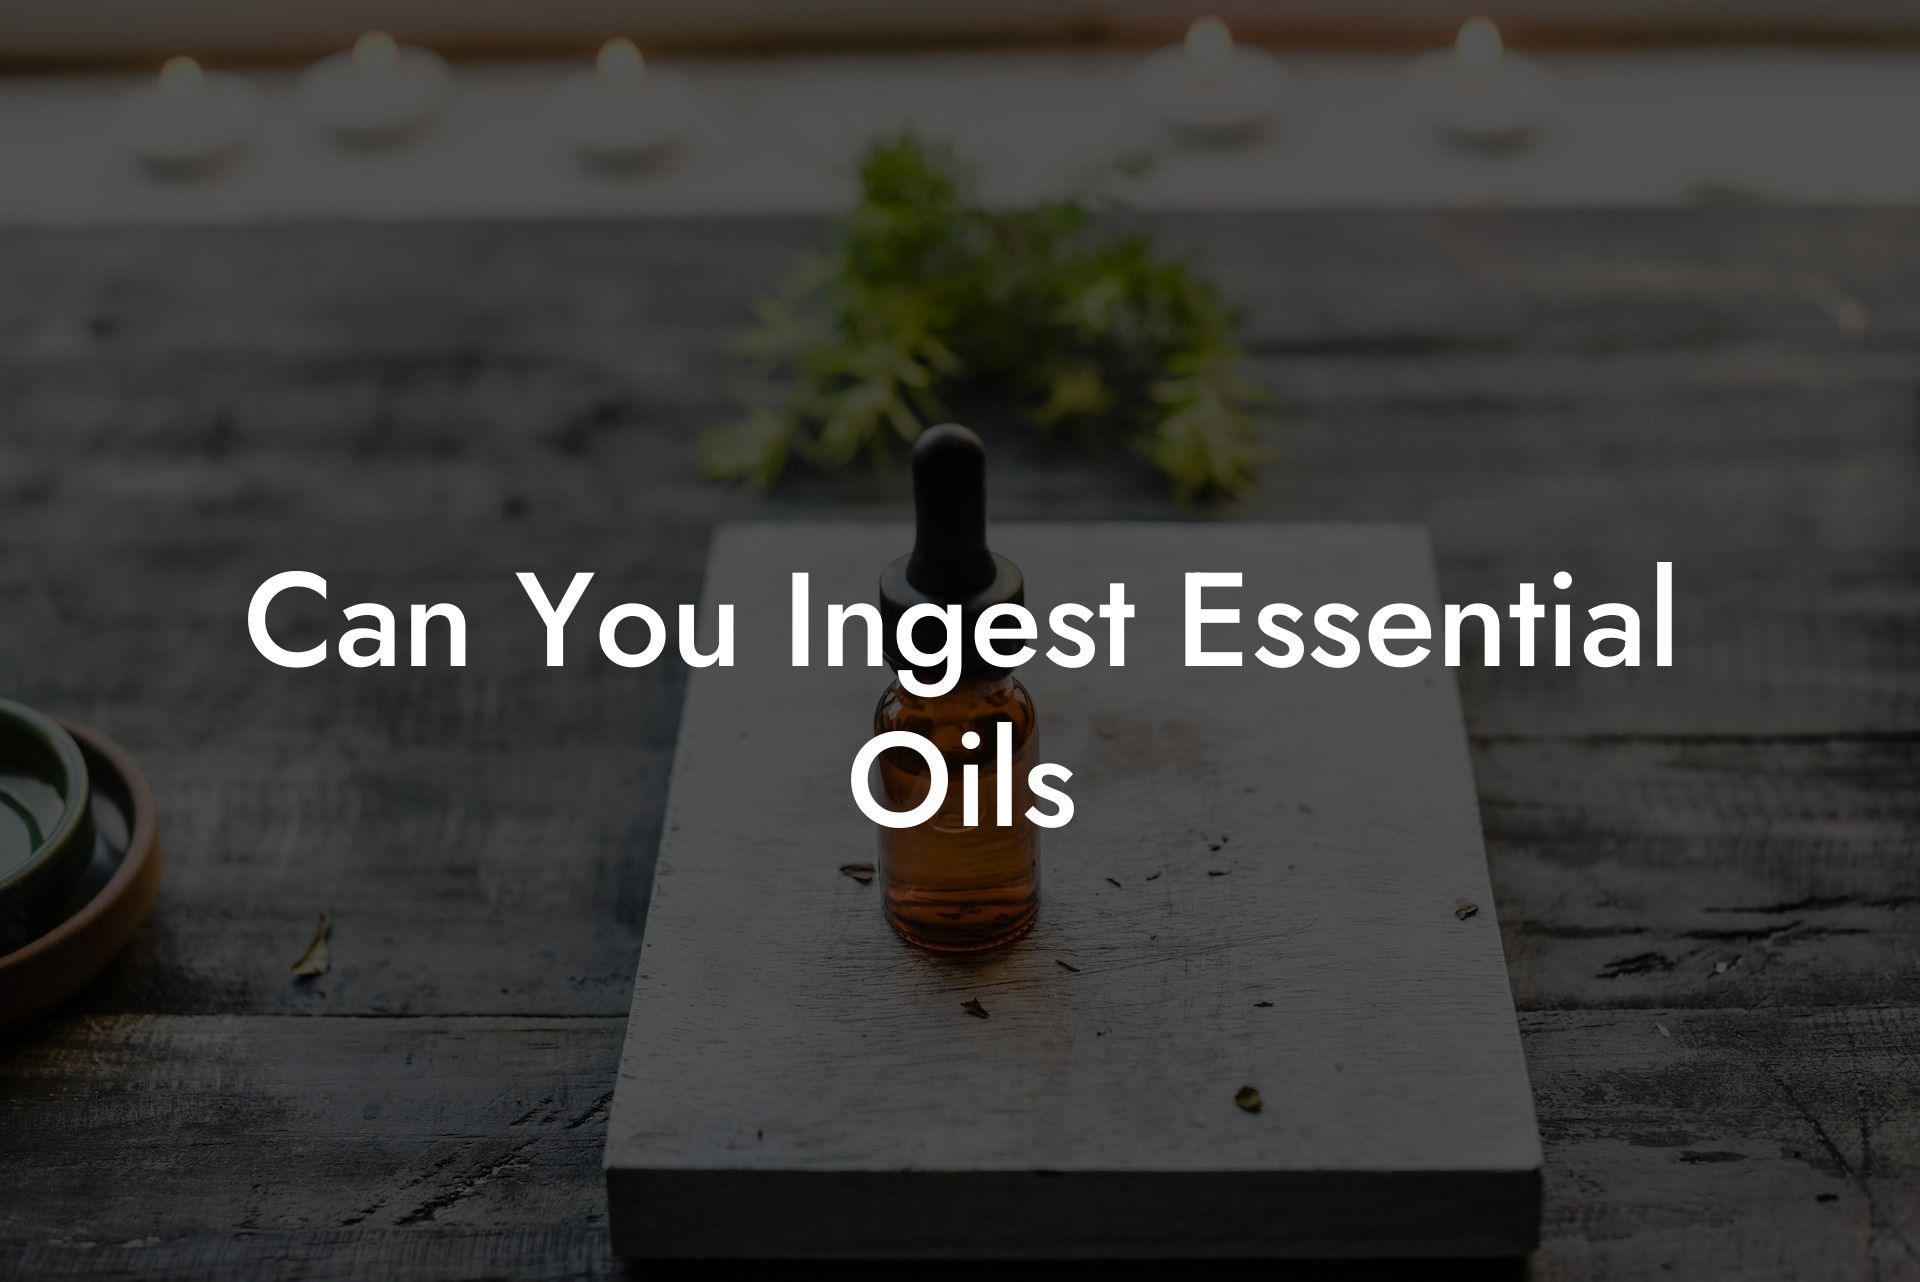 Can You Ingest Essential Oils